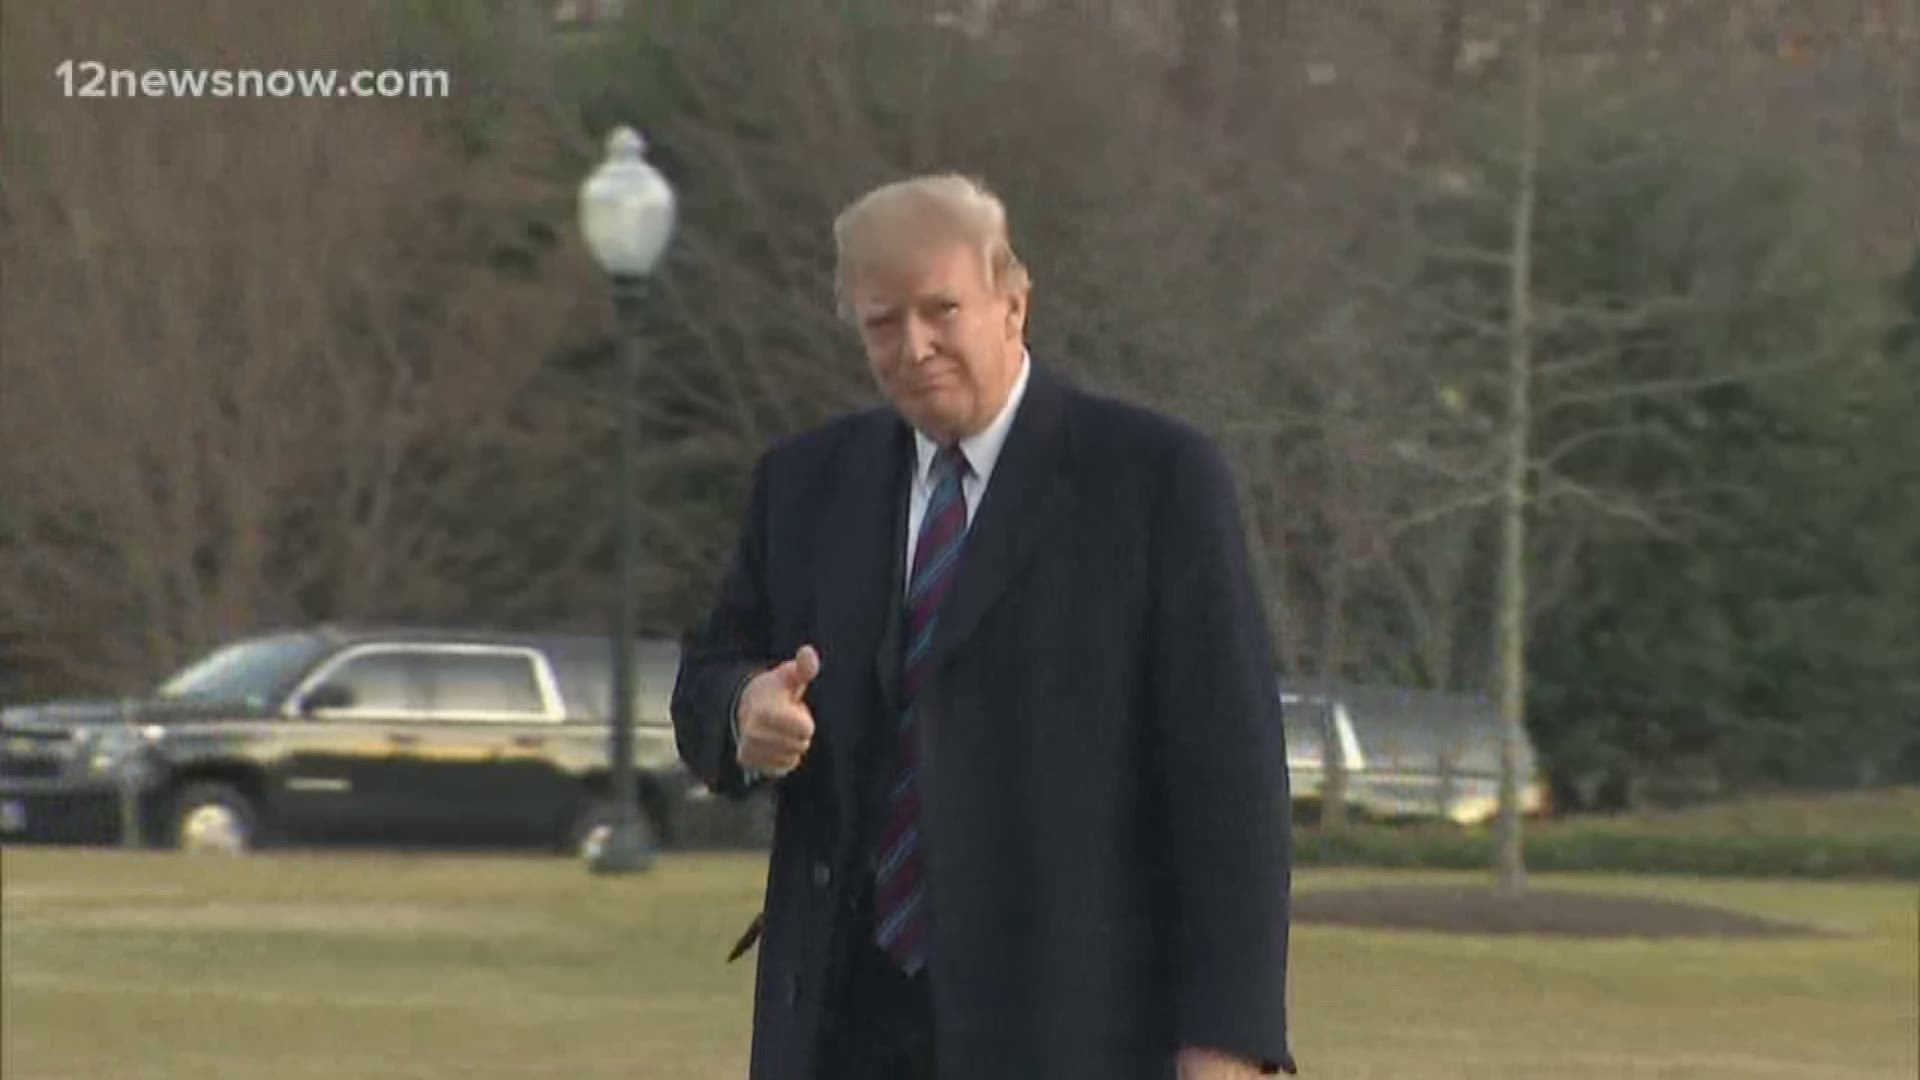 President Trump to announce that he is signing the compromised deal that congress passed for border security funding, but he also intends to declare a national emergency at the border to get the funding for the wall he intended.